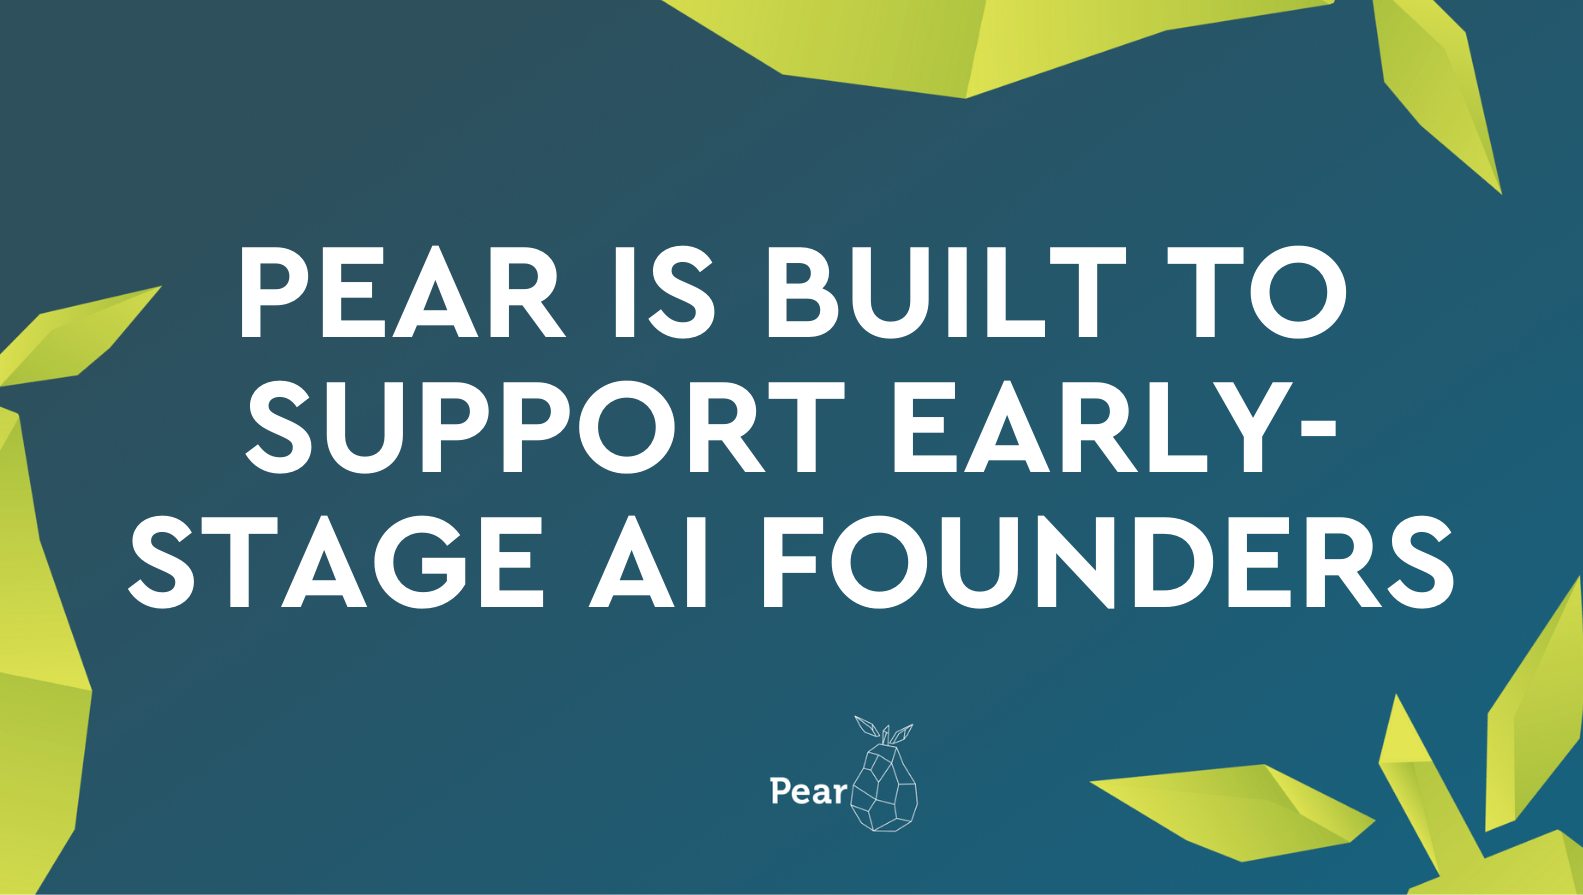 resources Pear is built to support early-stage AI founders